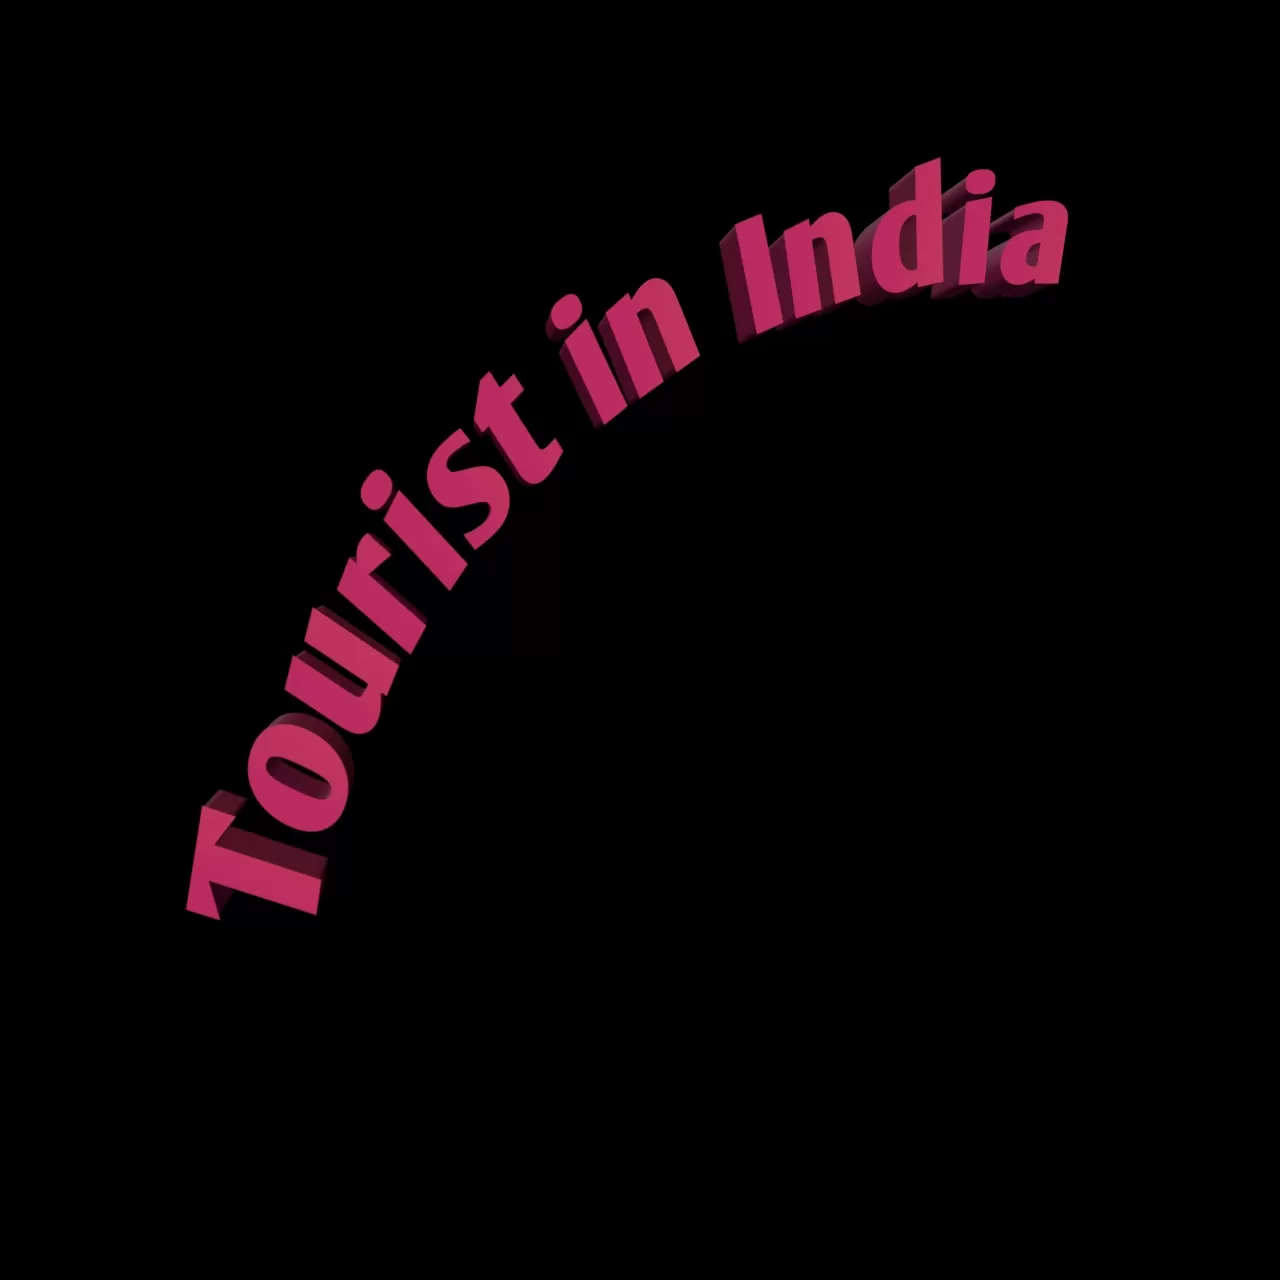 Cover Image of Tourist in India 